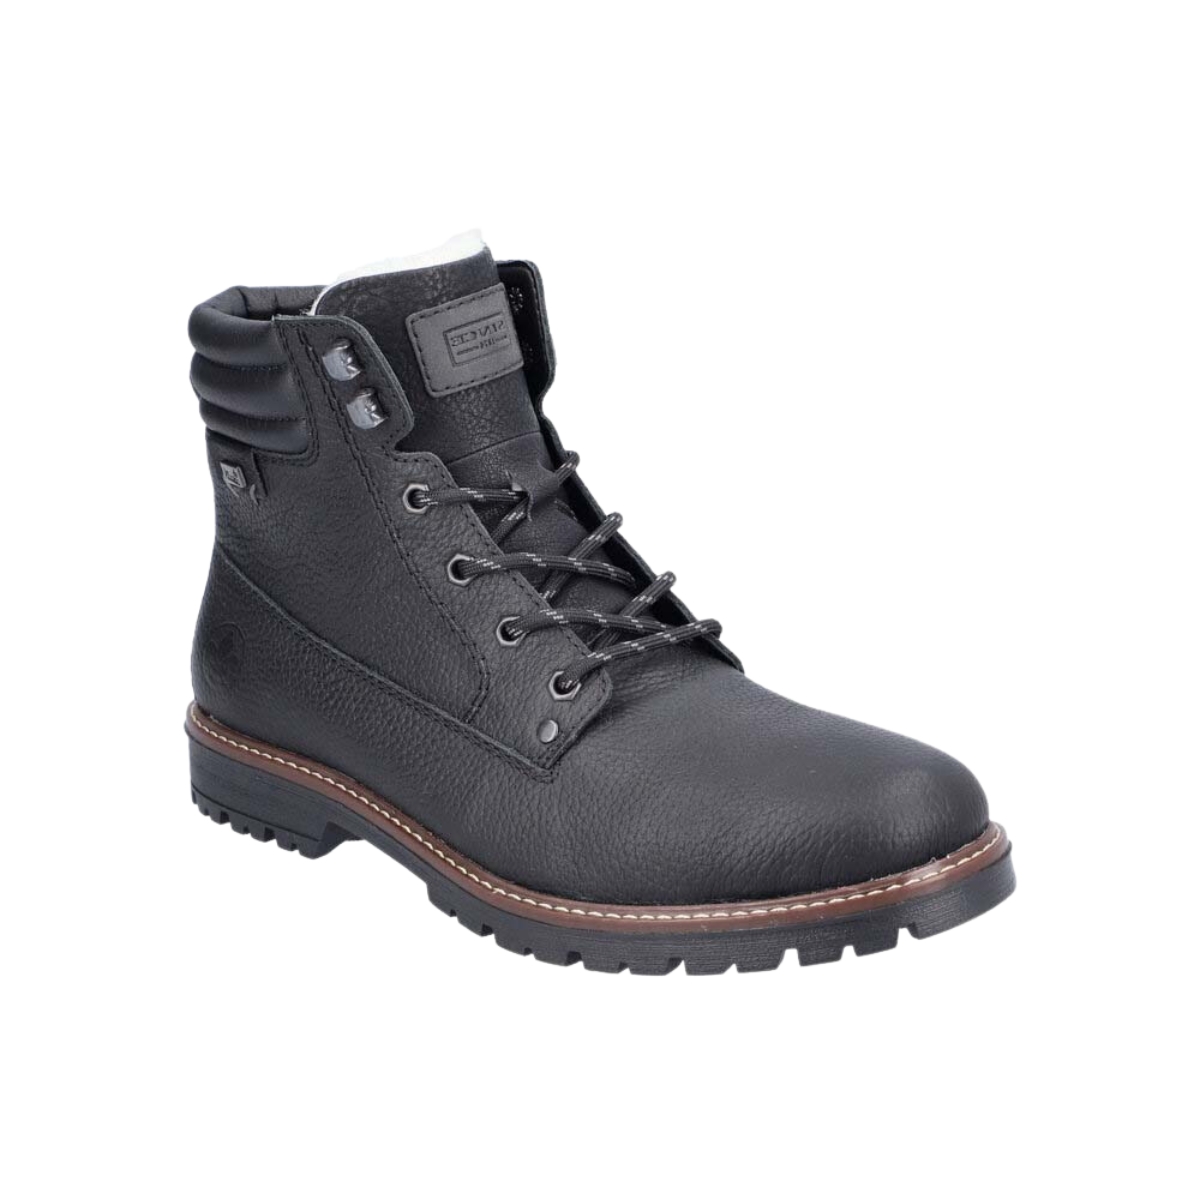 Rieker F3600-00 Black leather Mens Winter Boots in a Plain Leather in Size 45